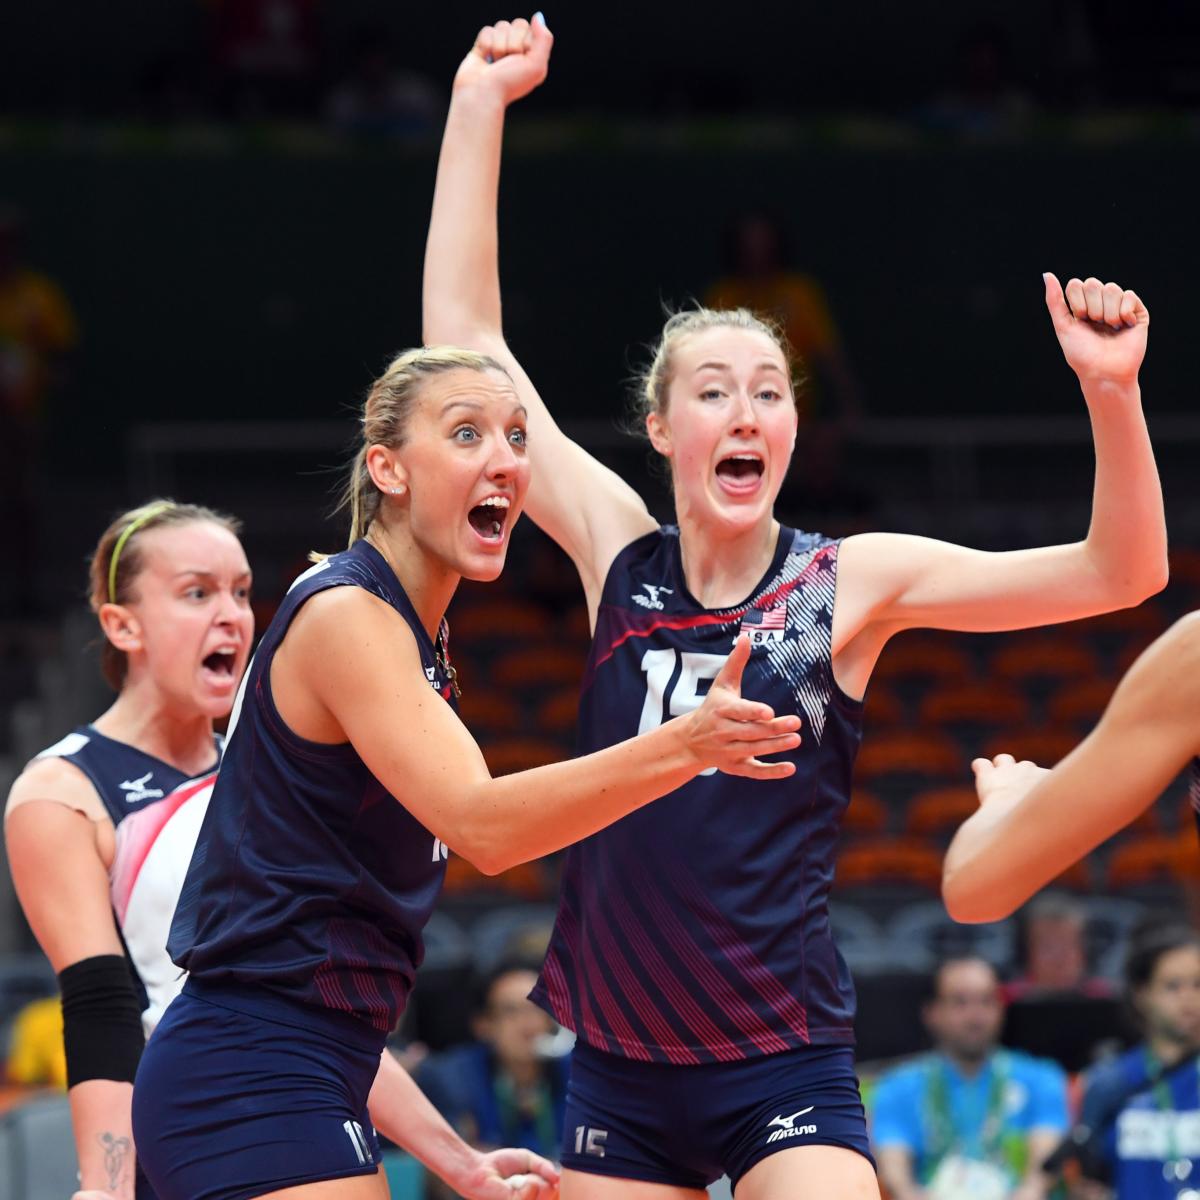 Olympic Indoor Volleyball 2016 Women's Medal Winners, Scores and